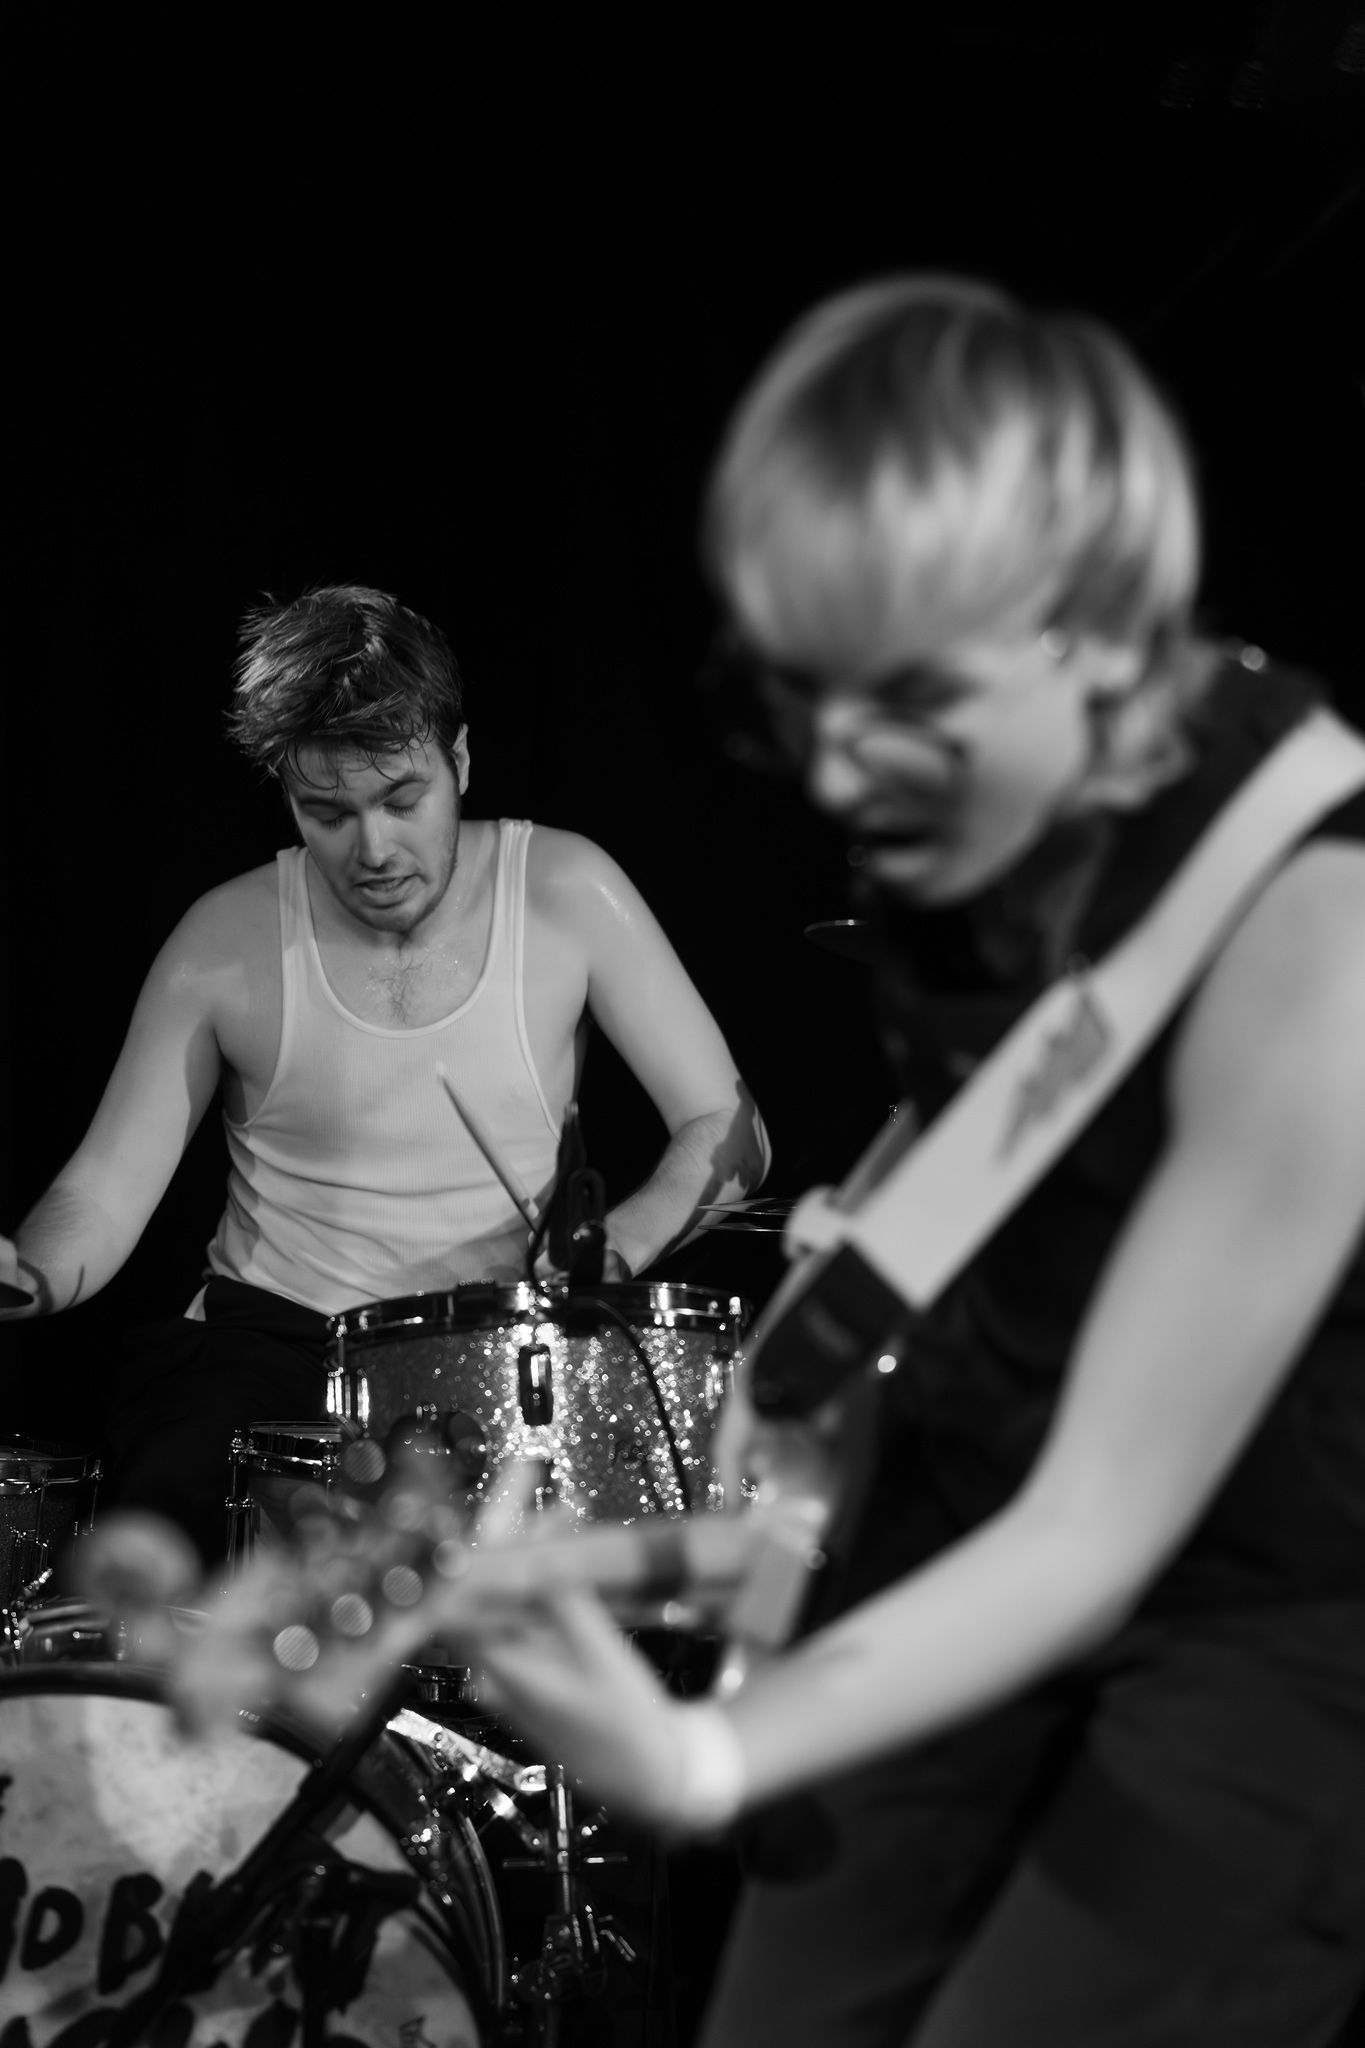 A black and white photo of a woman playing bass in the foreground with a drummer in a tank top in the background